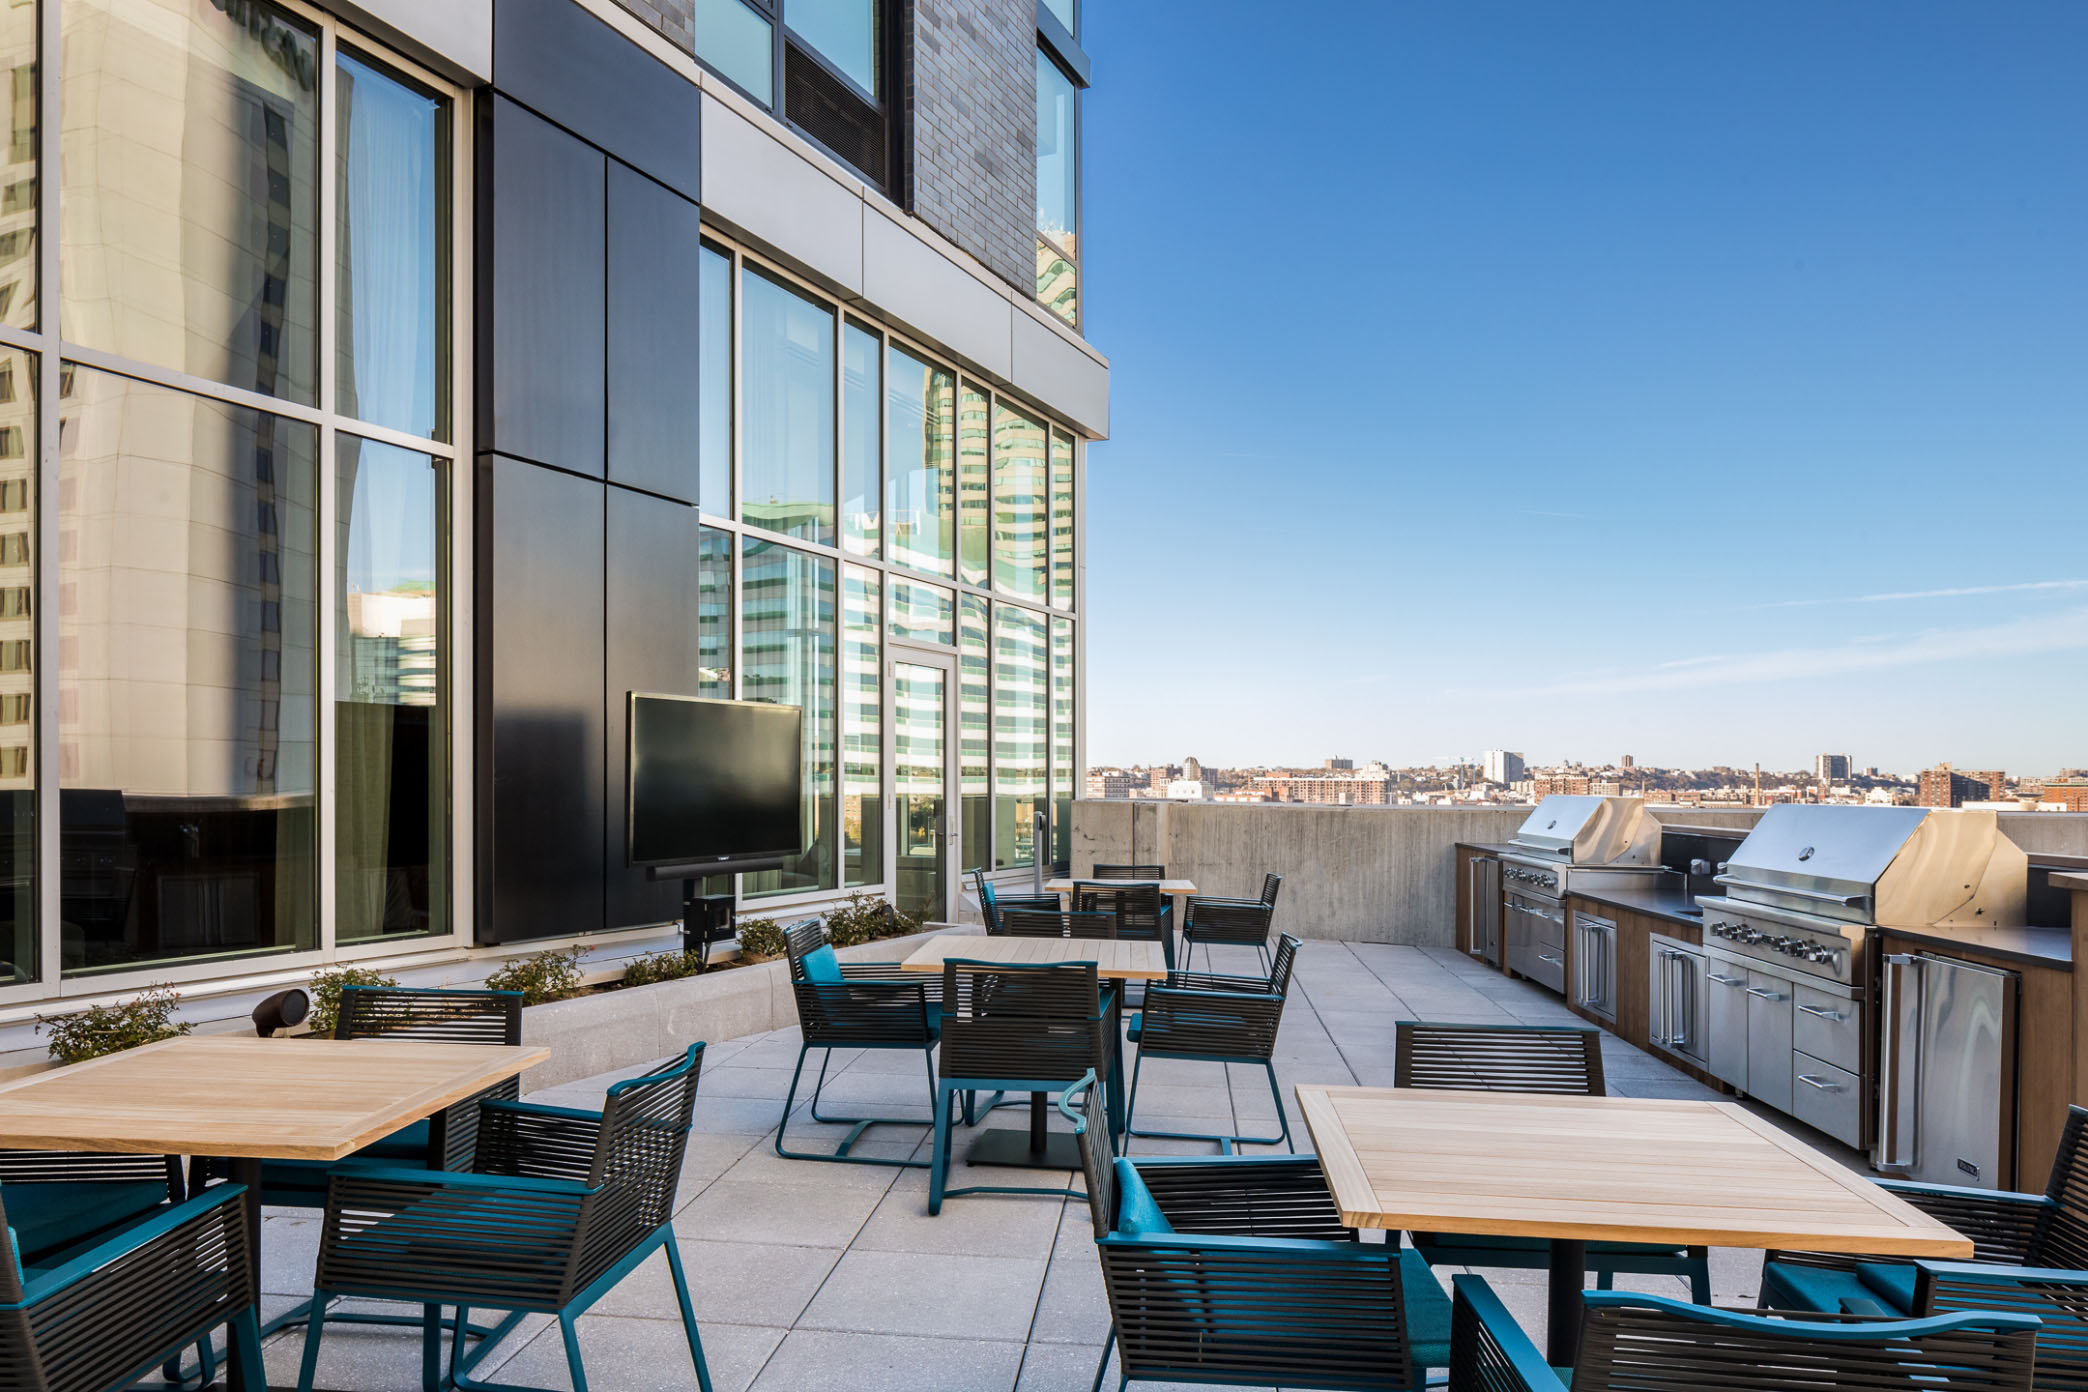 roof deck dining tables and grills overlooking jersey city hoboken